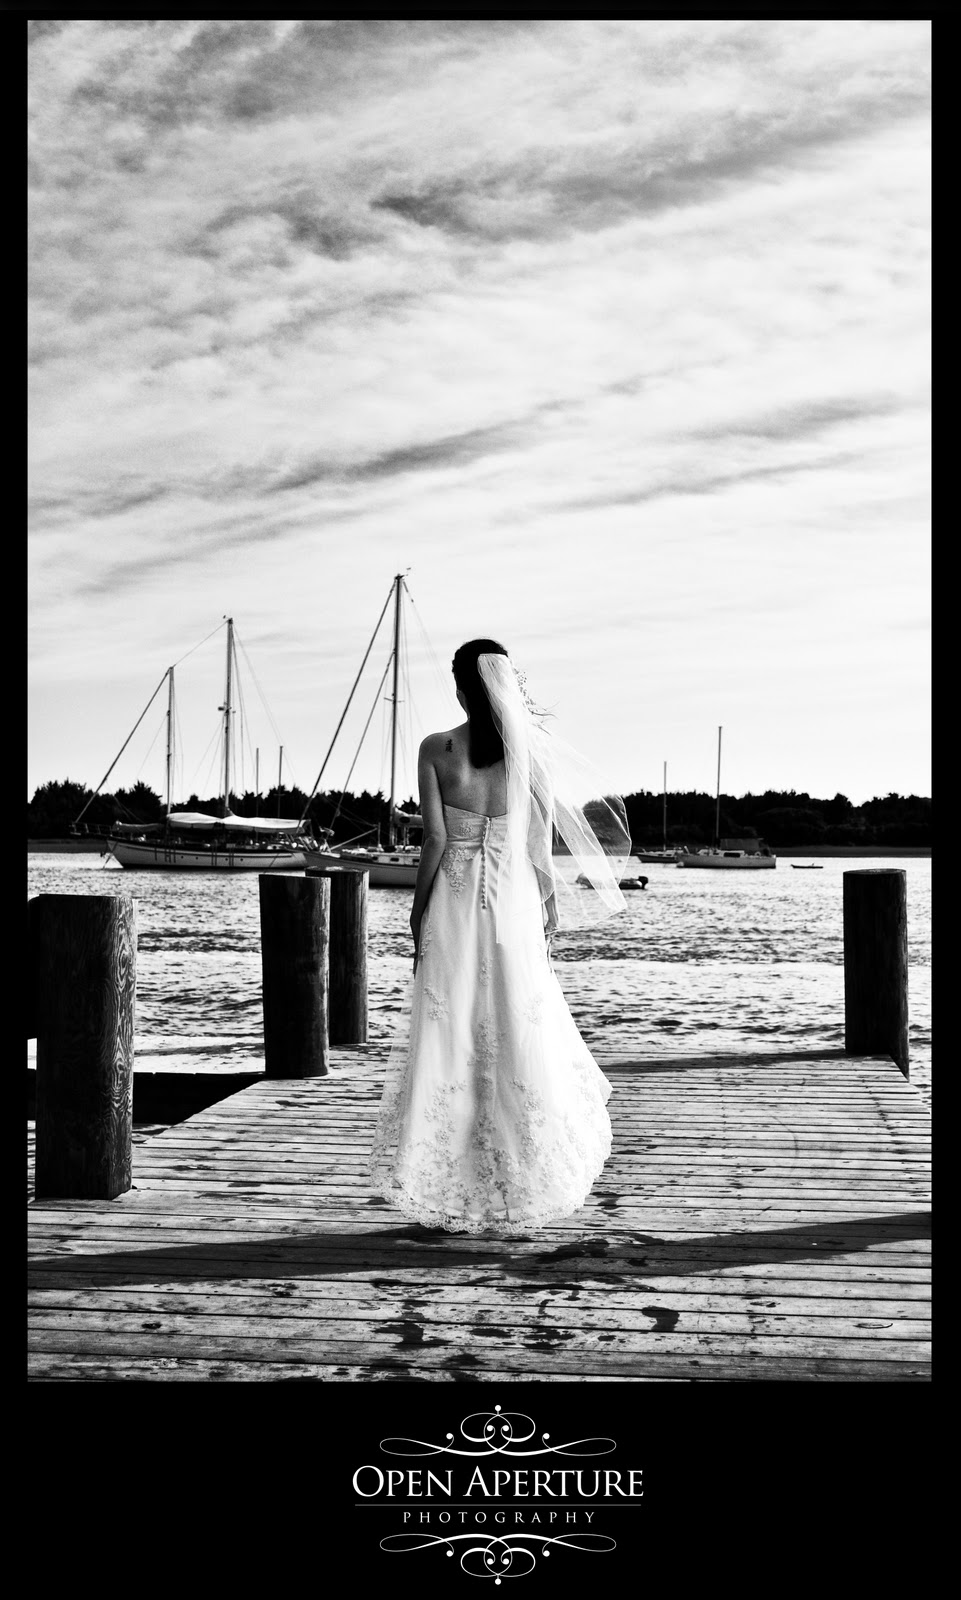 Our Favorite 10 From 2011 | Photography New Bern